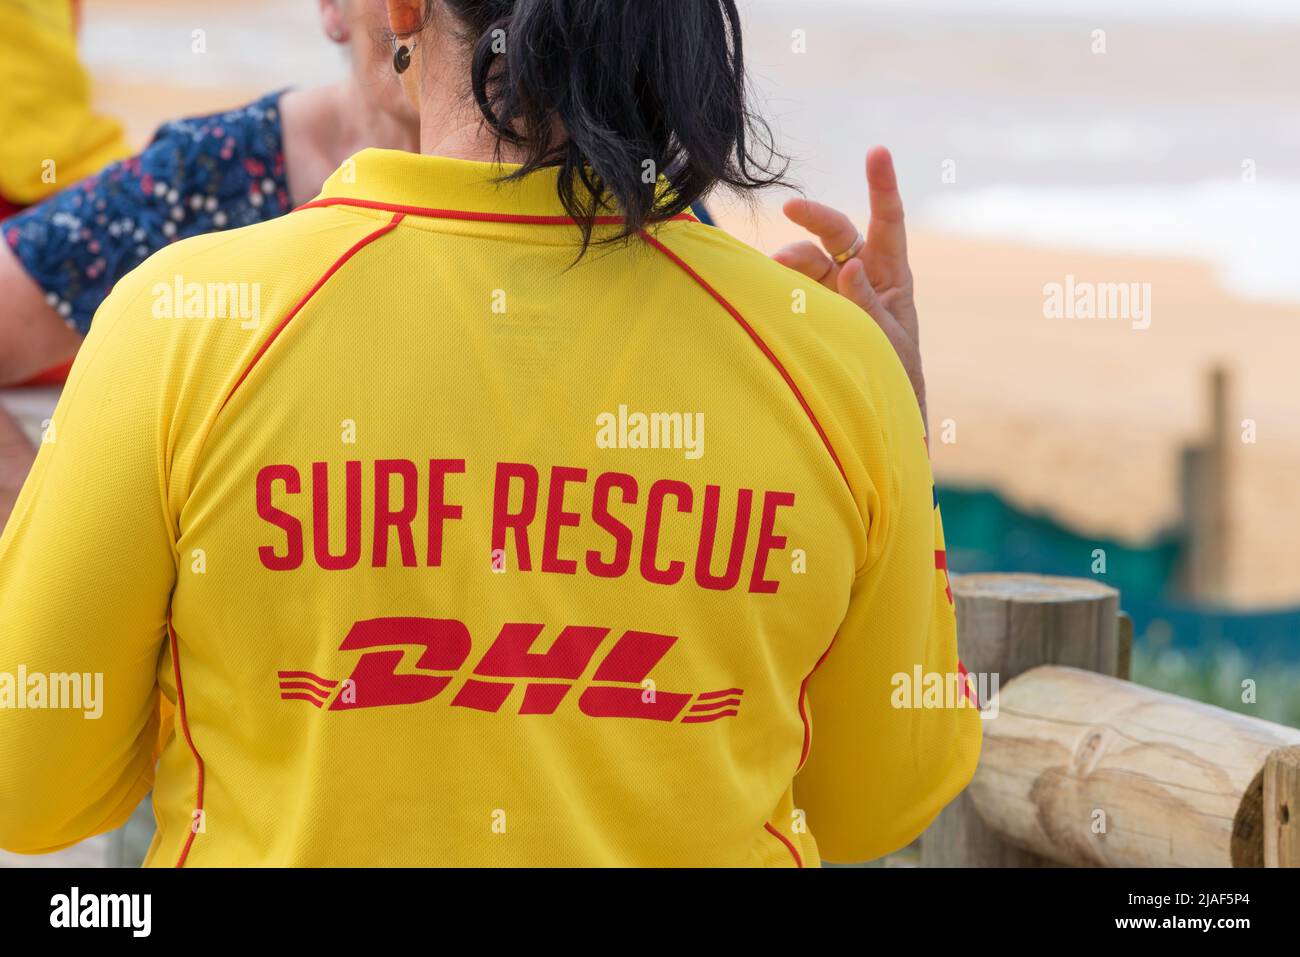 A woman wearing a distinctive Surf Life Saving Australia yellow top speaks to someone  at a beach in New South Wales, Australia Stock Photo